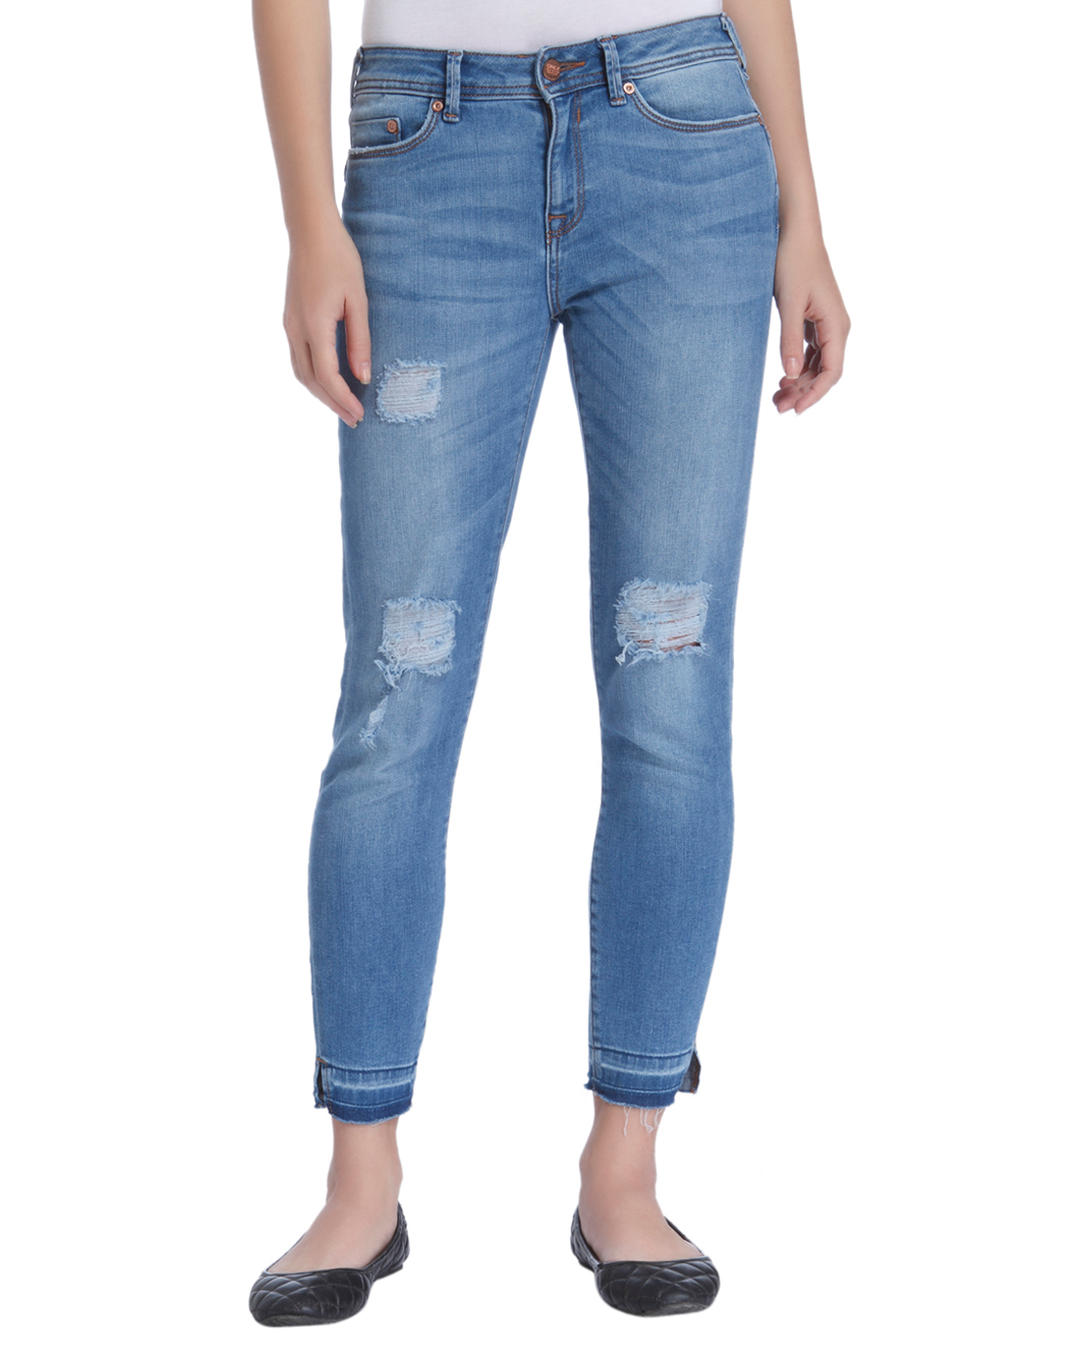 buy only jeans online